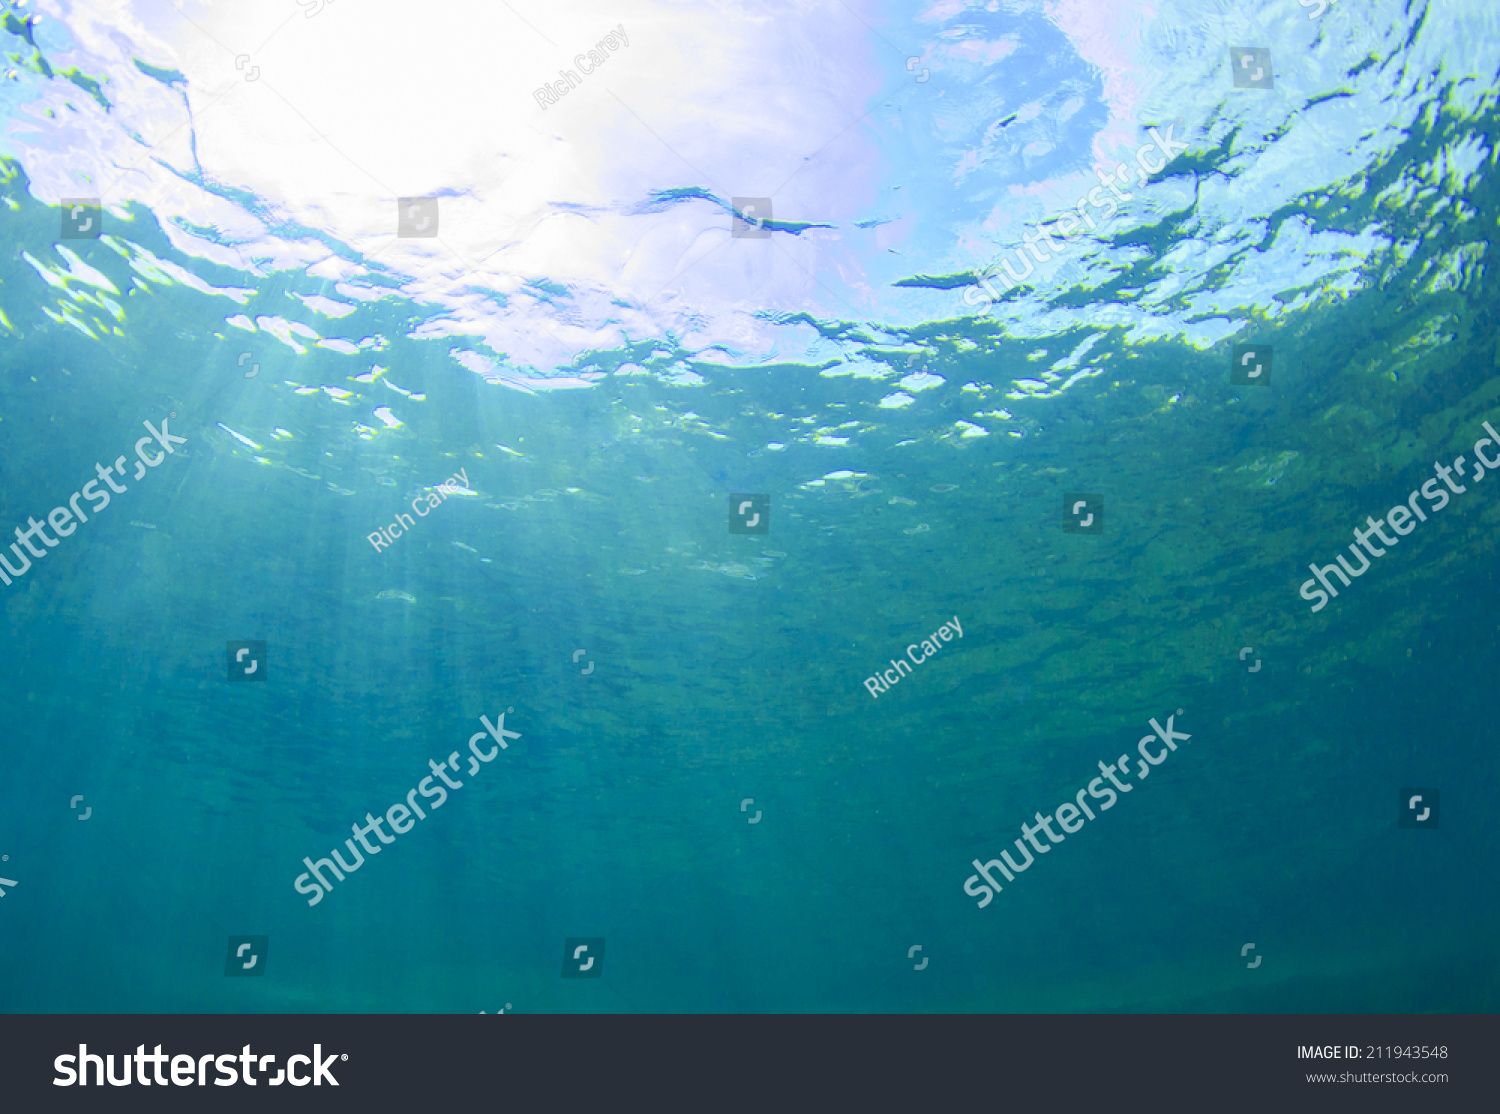 Abstract blue water background #211943548